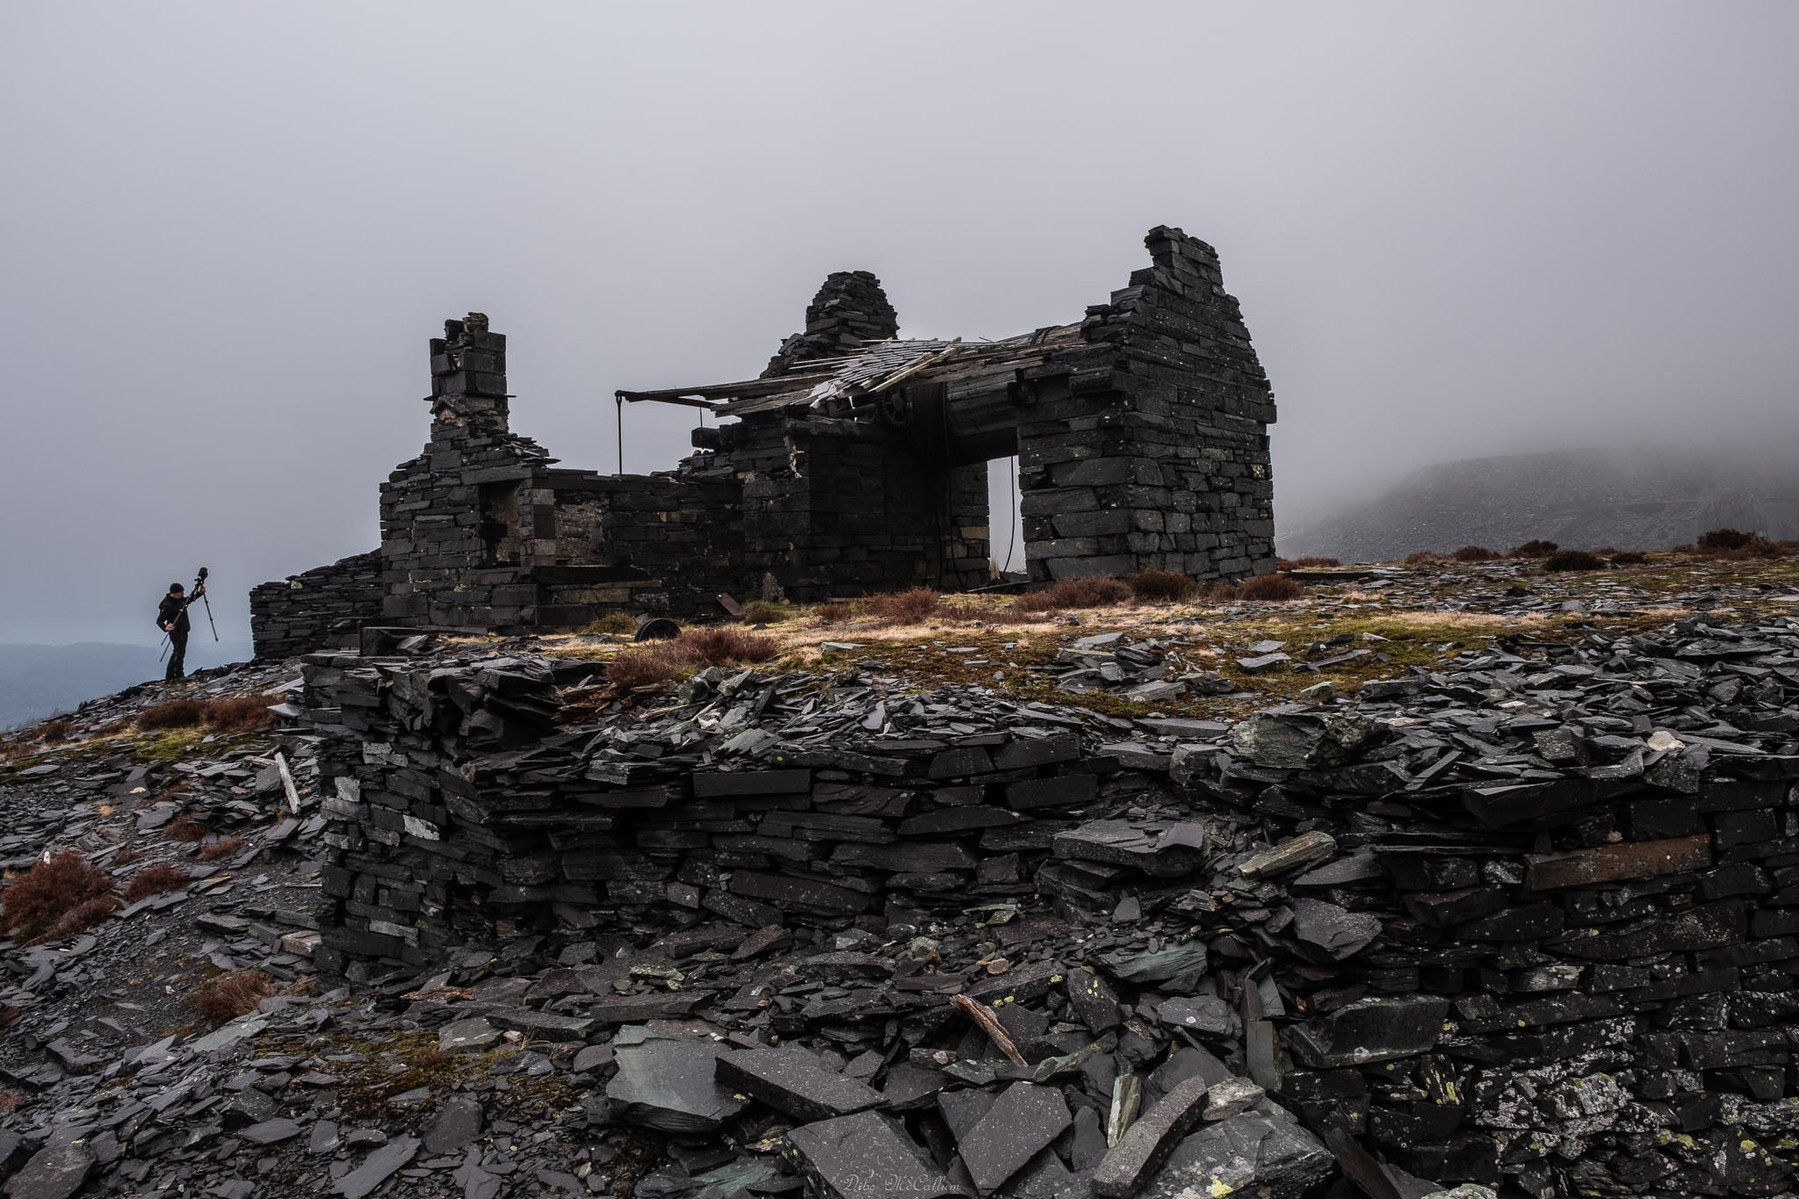 Derelict building in dinorwic quarry  in wales. A abandoned slate mine